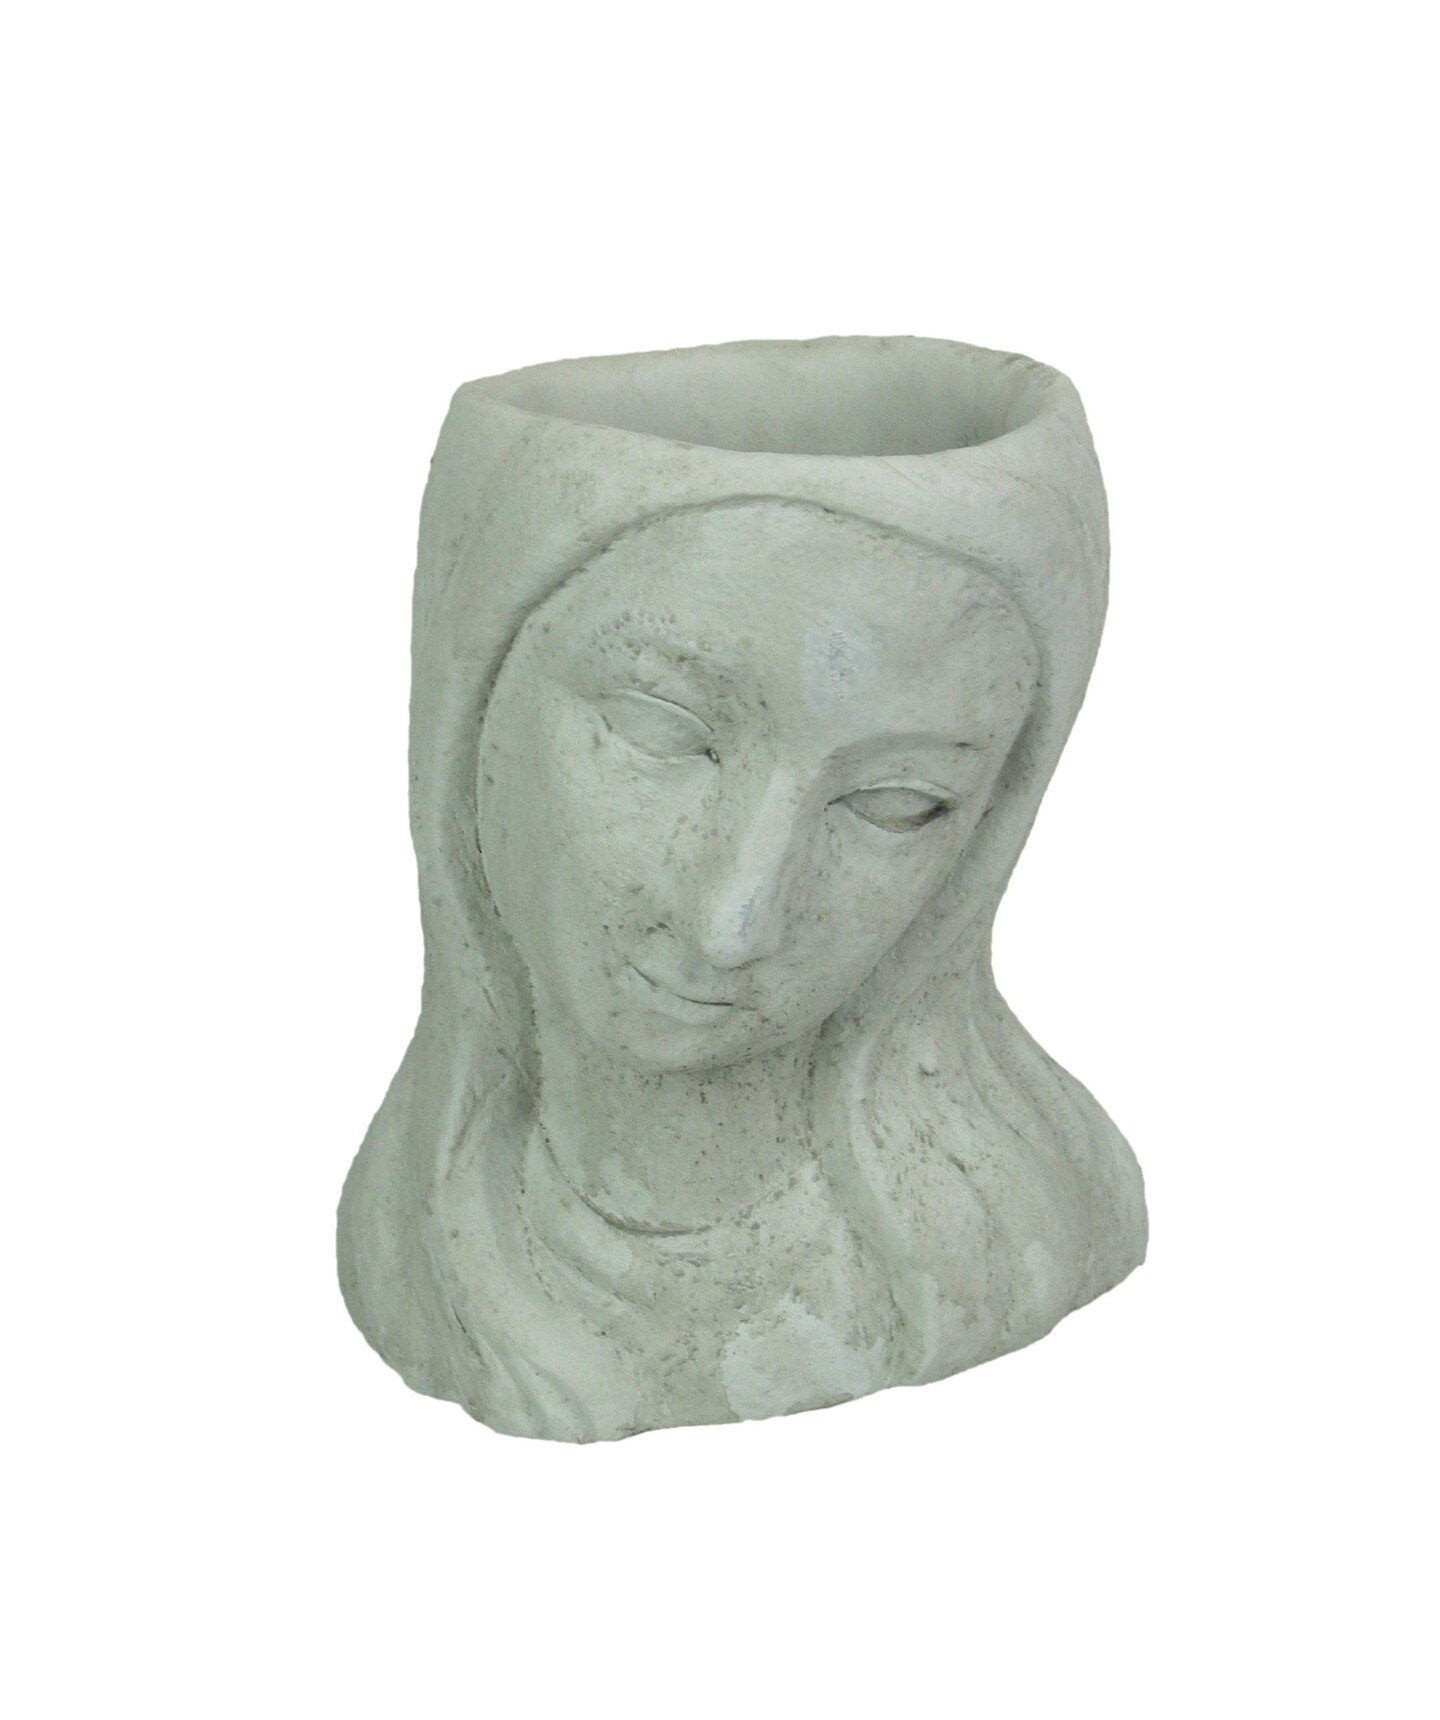 Long-Haired Maiden Cast Polyresin Head Planter Pot 8 Inches High